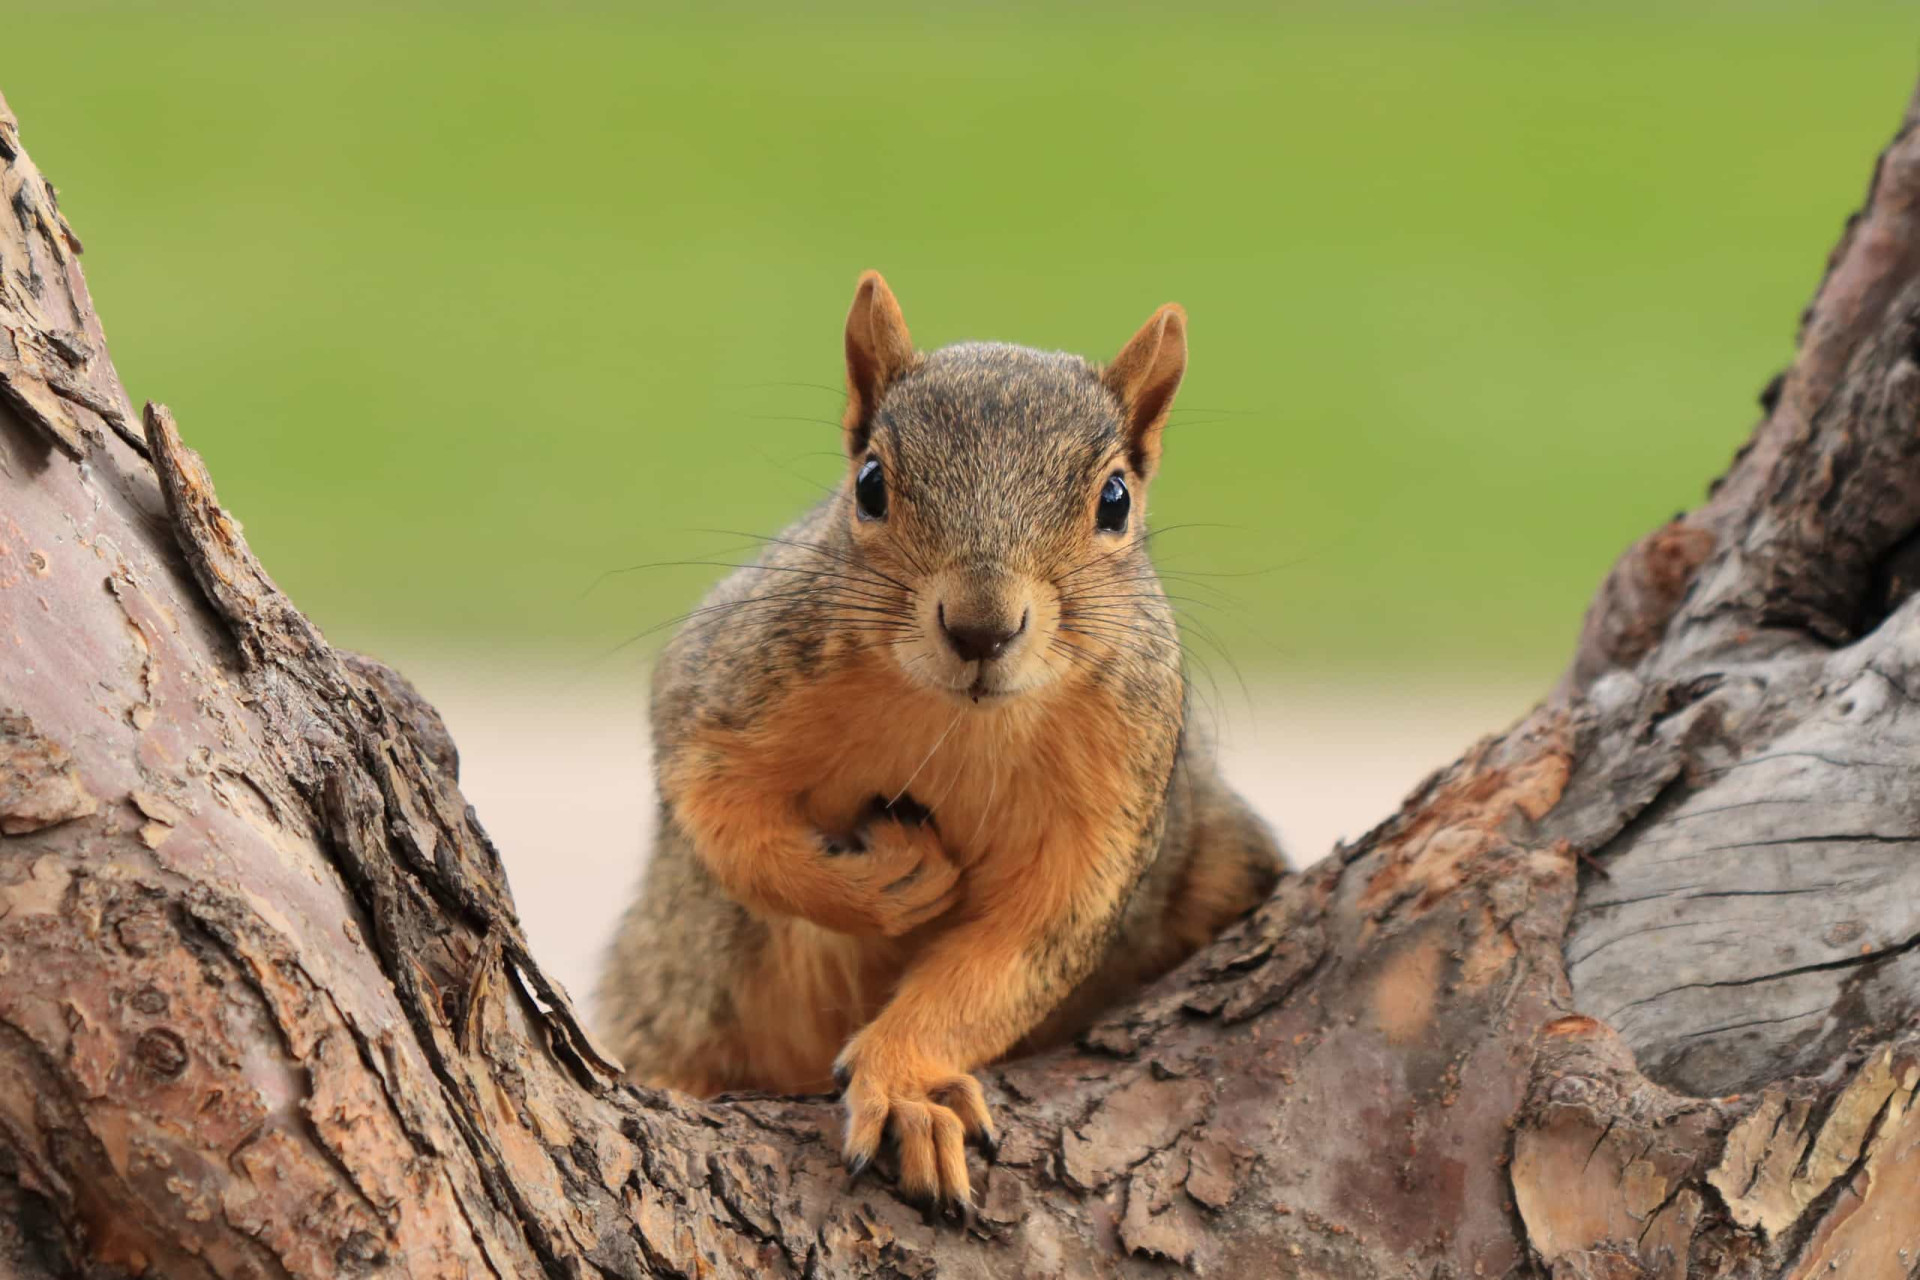 <p>Squirrels, rabbits, or deer can wreak havoc on your garden. To protect your precious plants, observe during dawn and dusk to see who and what is coming and going through your garden, then determine what type of barrier to install.</p><p><a href="https://www.msn.com/en-us/community/channel/vid-7xx8mnucu55yw63we9va2gwr7uihbxwc68fxqp25x6tg4ftibpra?cvid=94631541bc0f4f89bfd59158d696ad7e">Follow us and access great exclusive content every day</a></p>